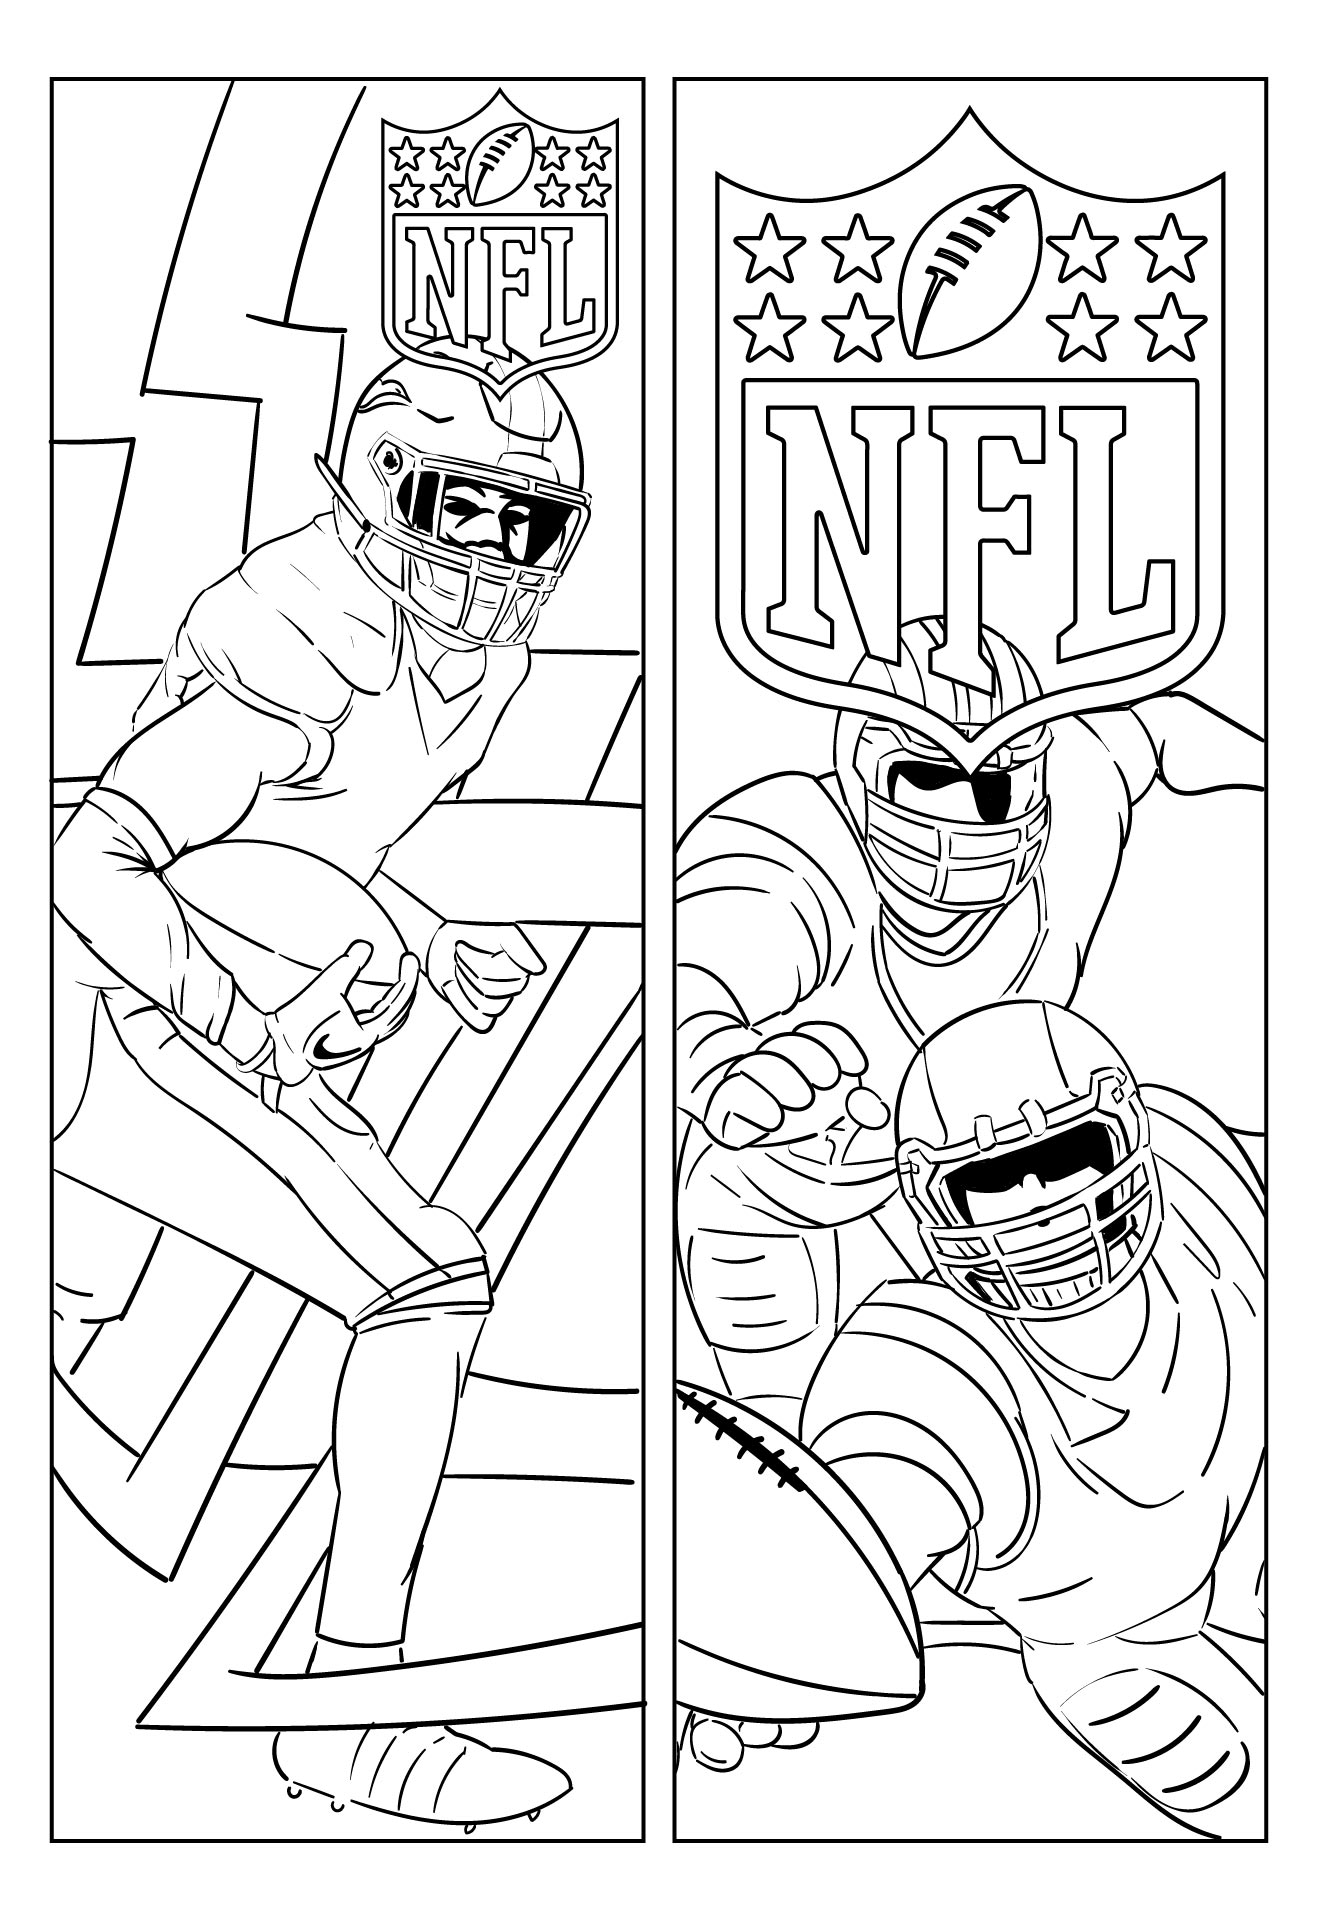 Printable Color Your Own NFL Sports Bookmarks